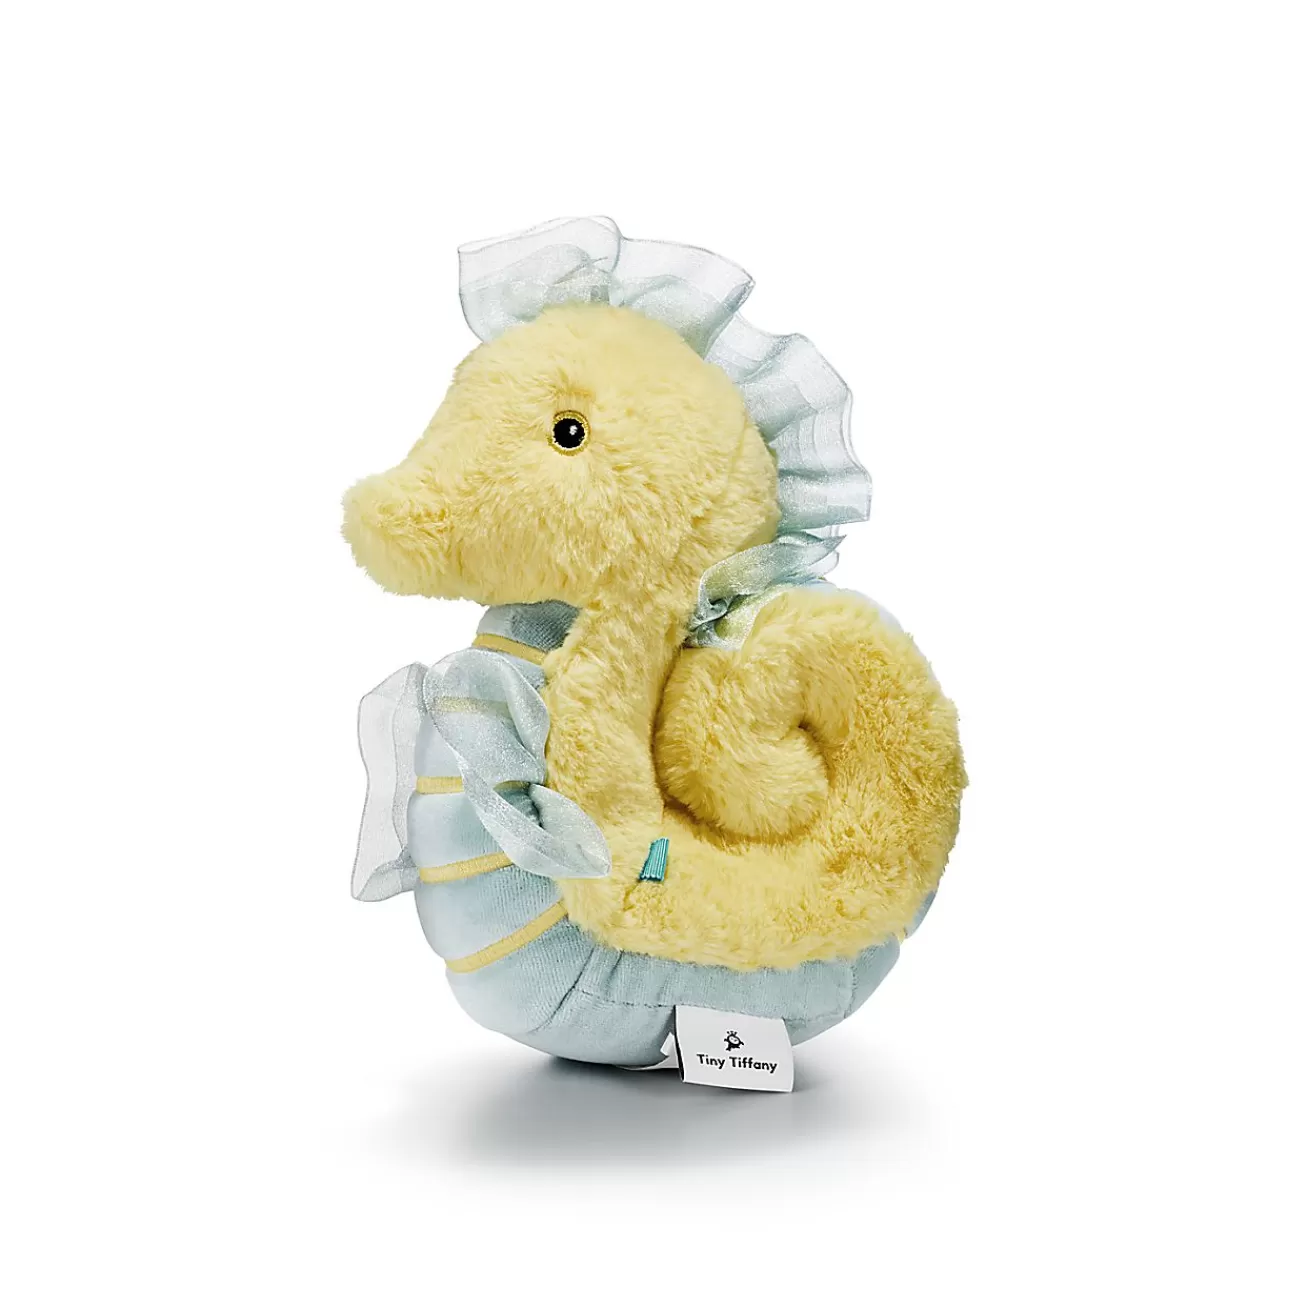 Tiffany & Co. Tiny Tiffany Seahorse Plush Toy in a Cotton Blend | ^ Baby | Baby